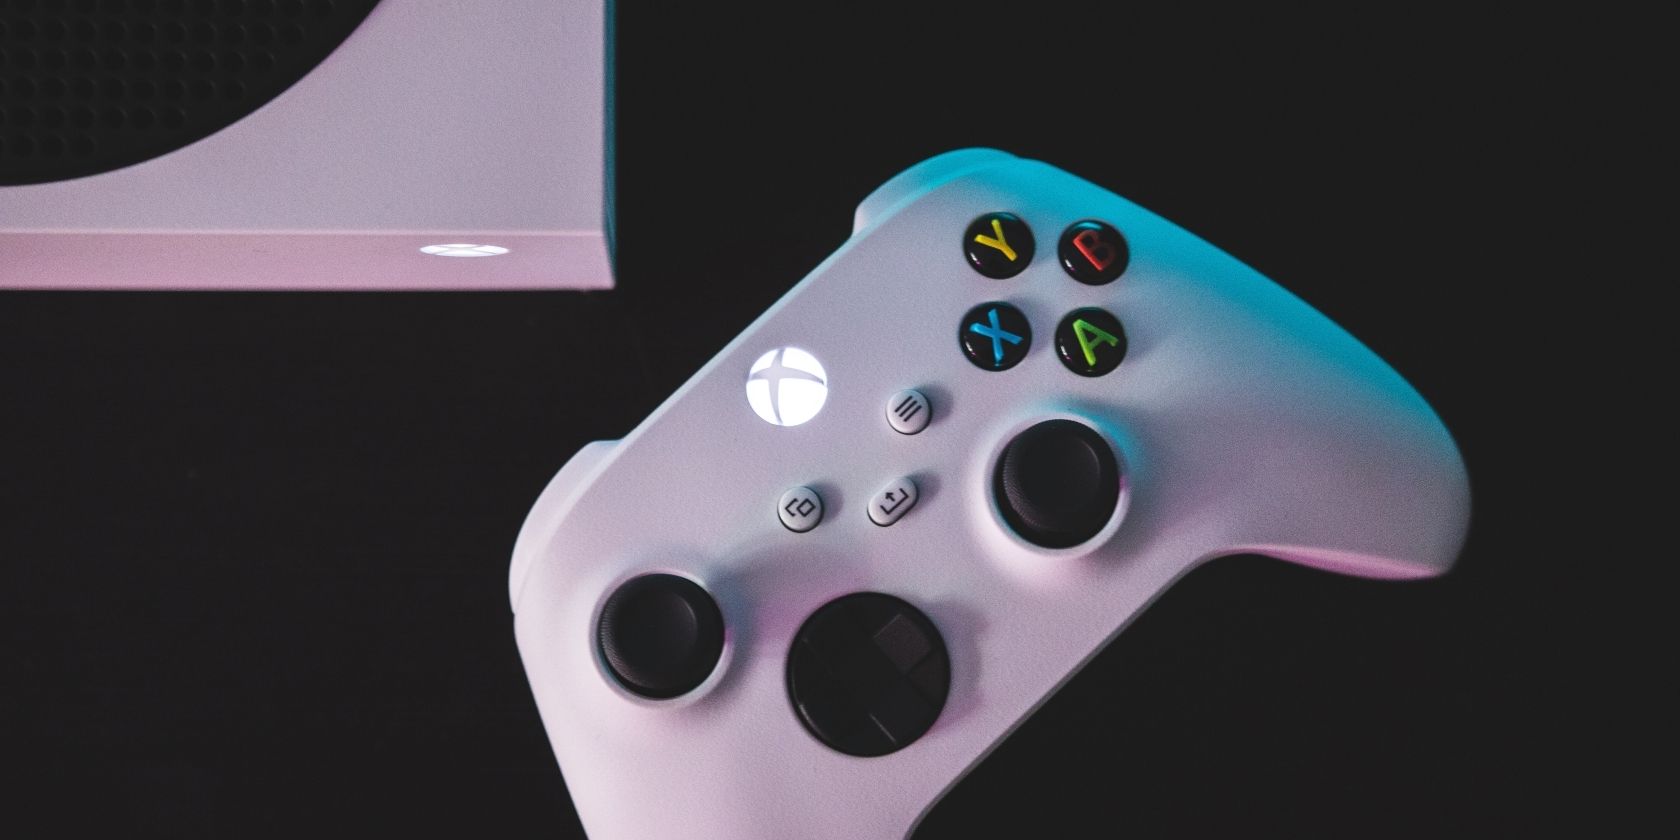 A photograph of an Xbox Wireless Controller next to an Xbox Series S console